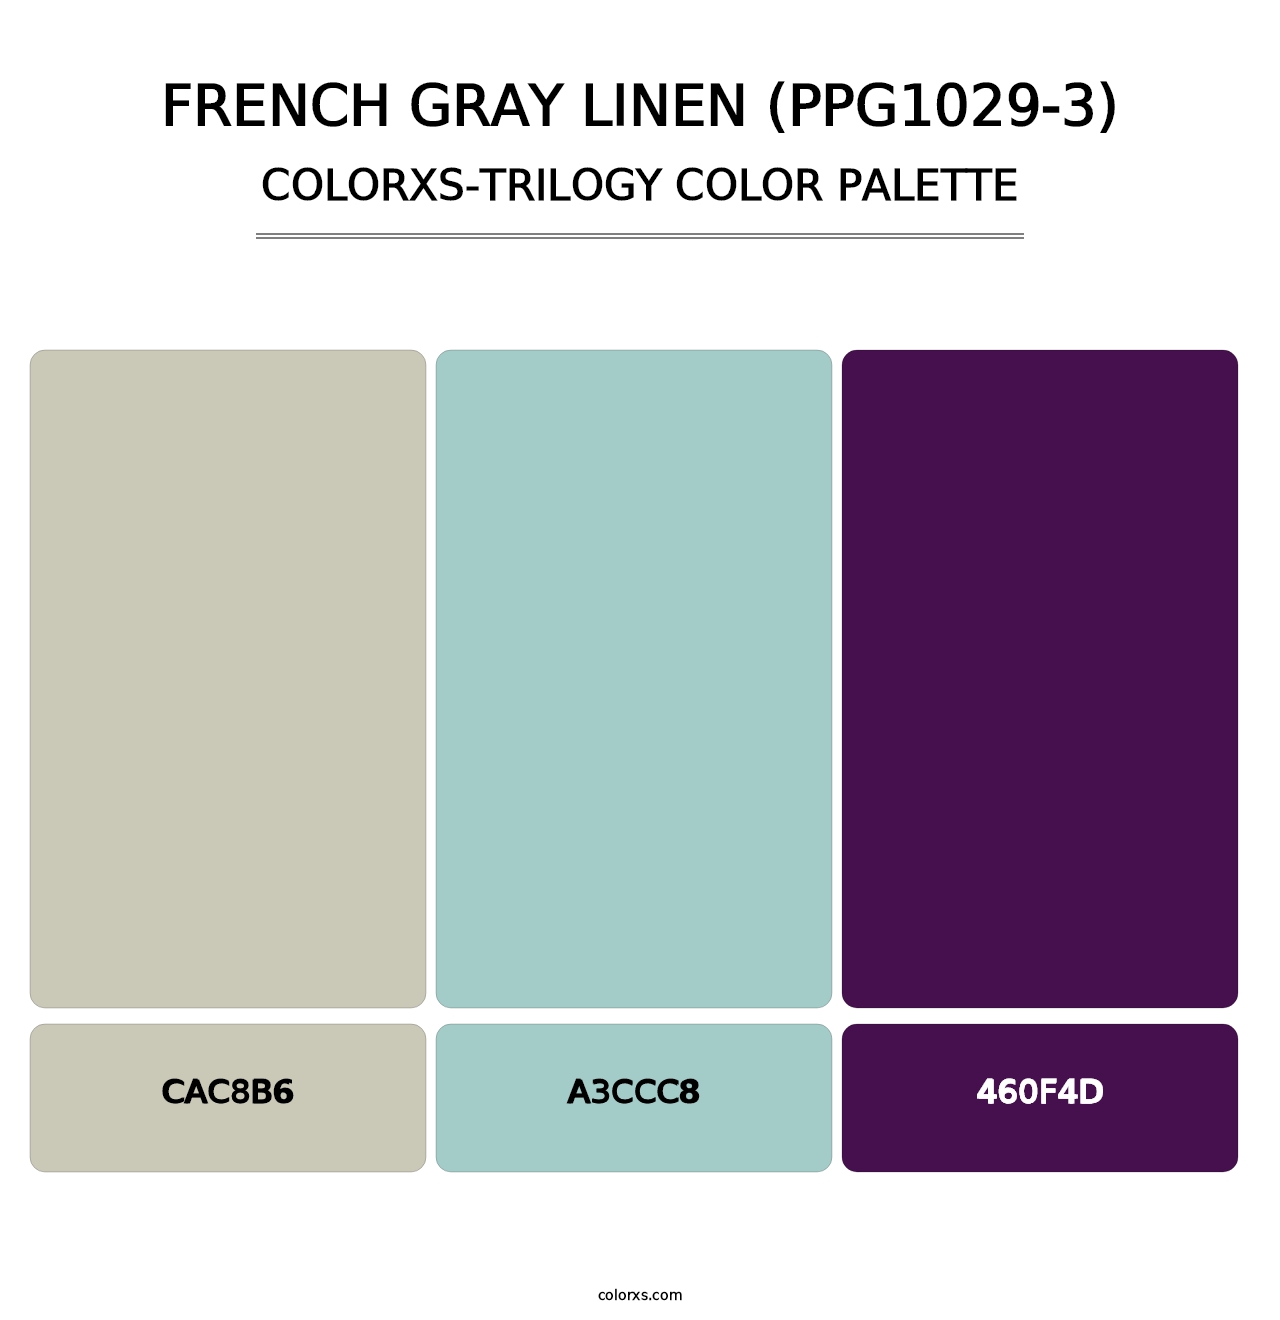 French Gray Linen (PPG1029-3) - Colorxs Trilogy Palette